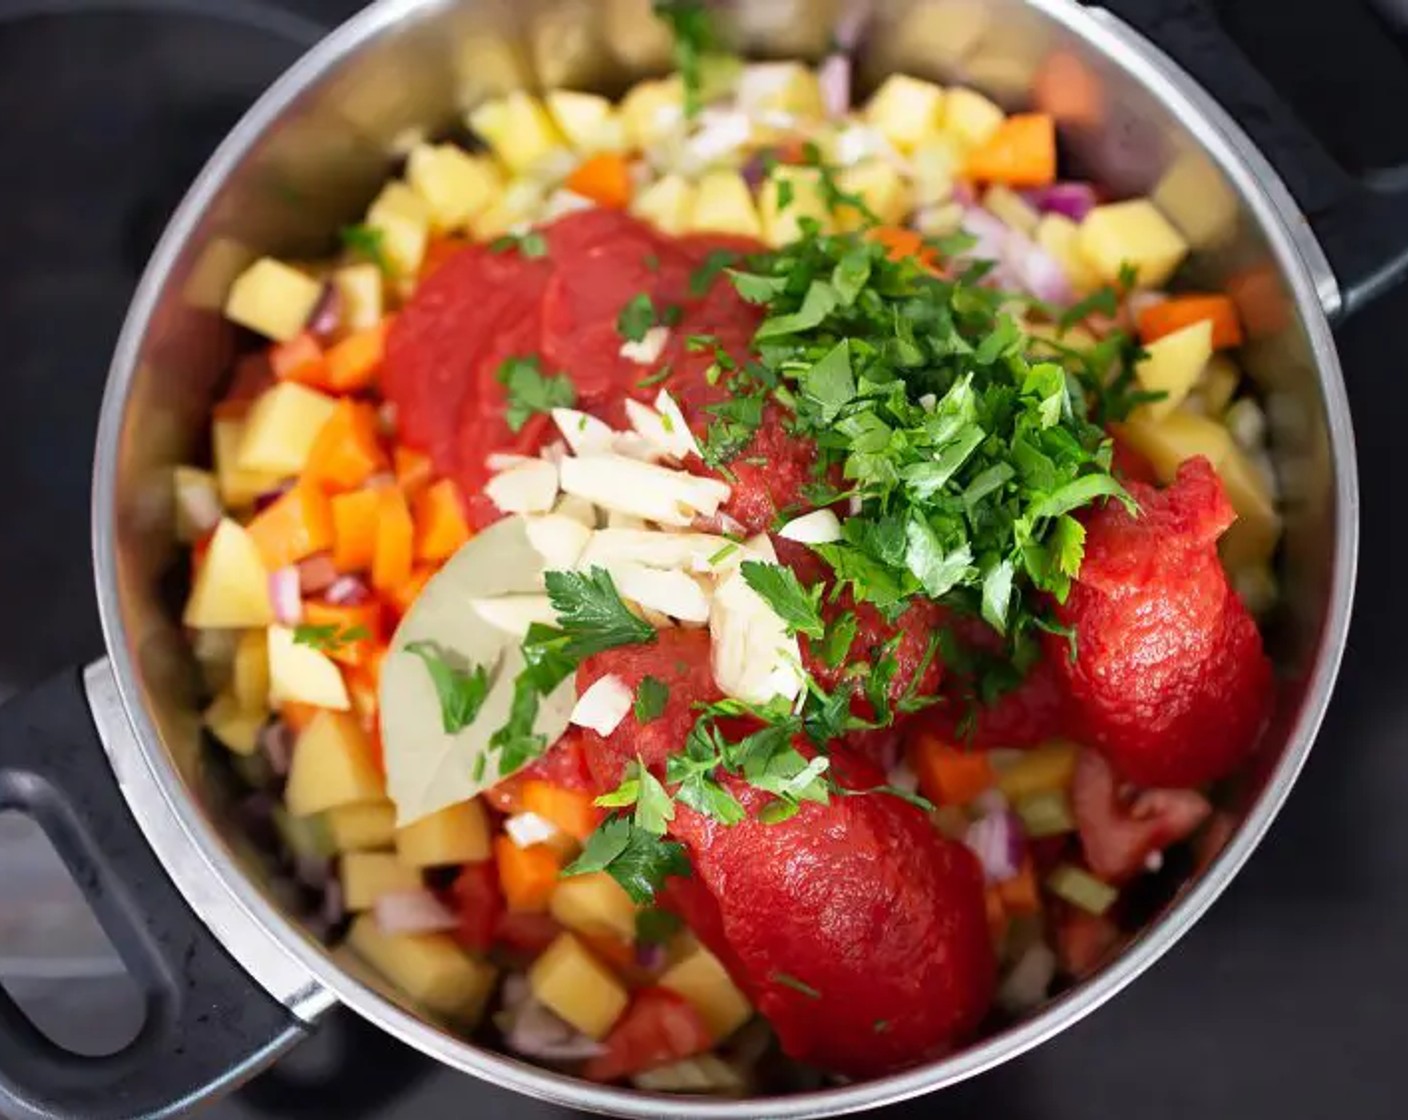 step 1 Place the Potatoes (3), Tomatoes (2), Onions (2), Carrots (2), and Celery (2 sticks) into a large saucepan and add the Canned Tomatoes (1 can), Garlic (1 clove), Bay Leaves (2), Dried Oregano (1/2 tsp),and Fresh Parsley (3 1/2 Tbsp).